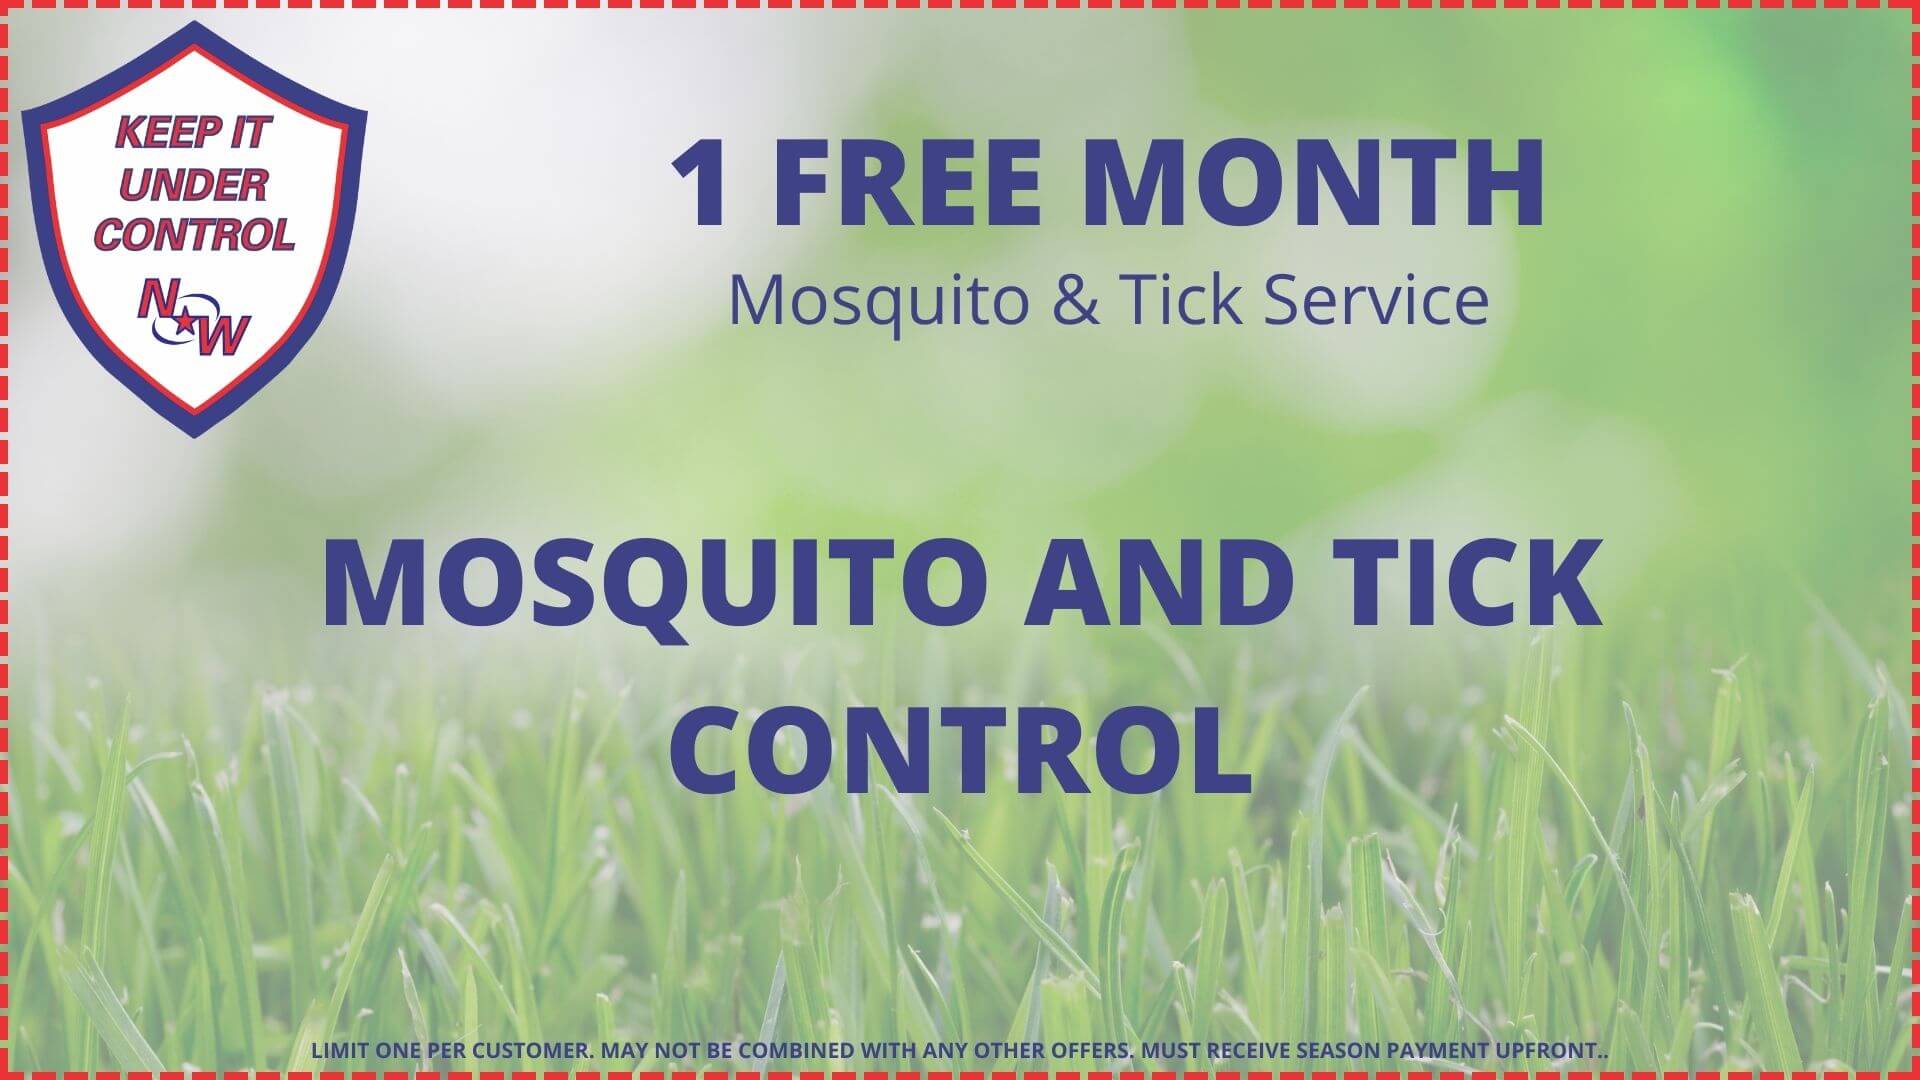 MOSQUITO COUPON